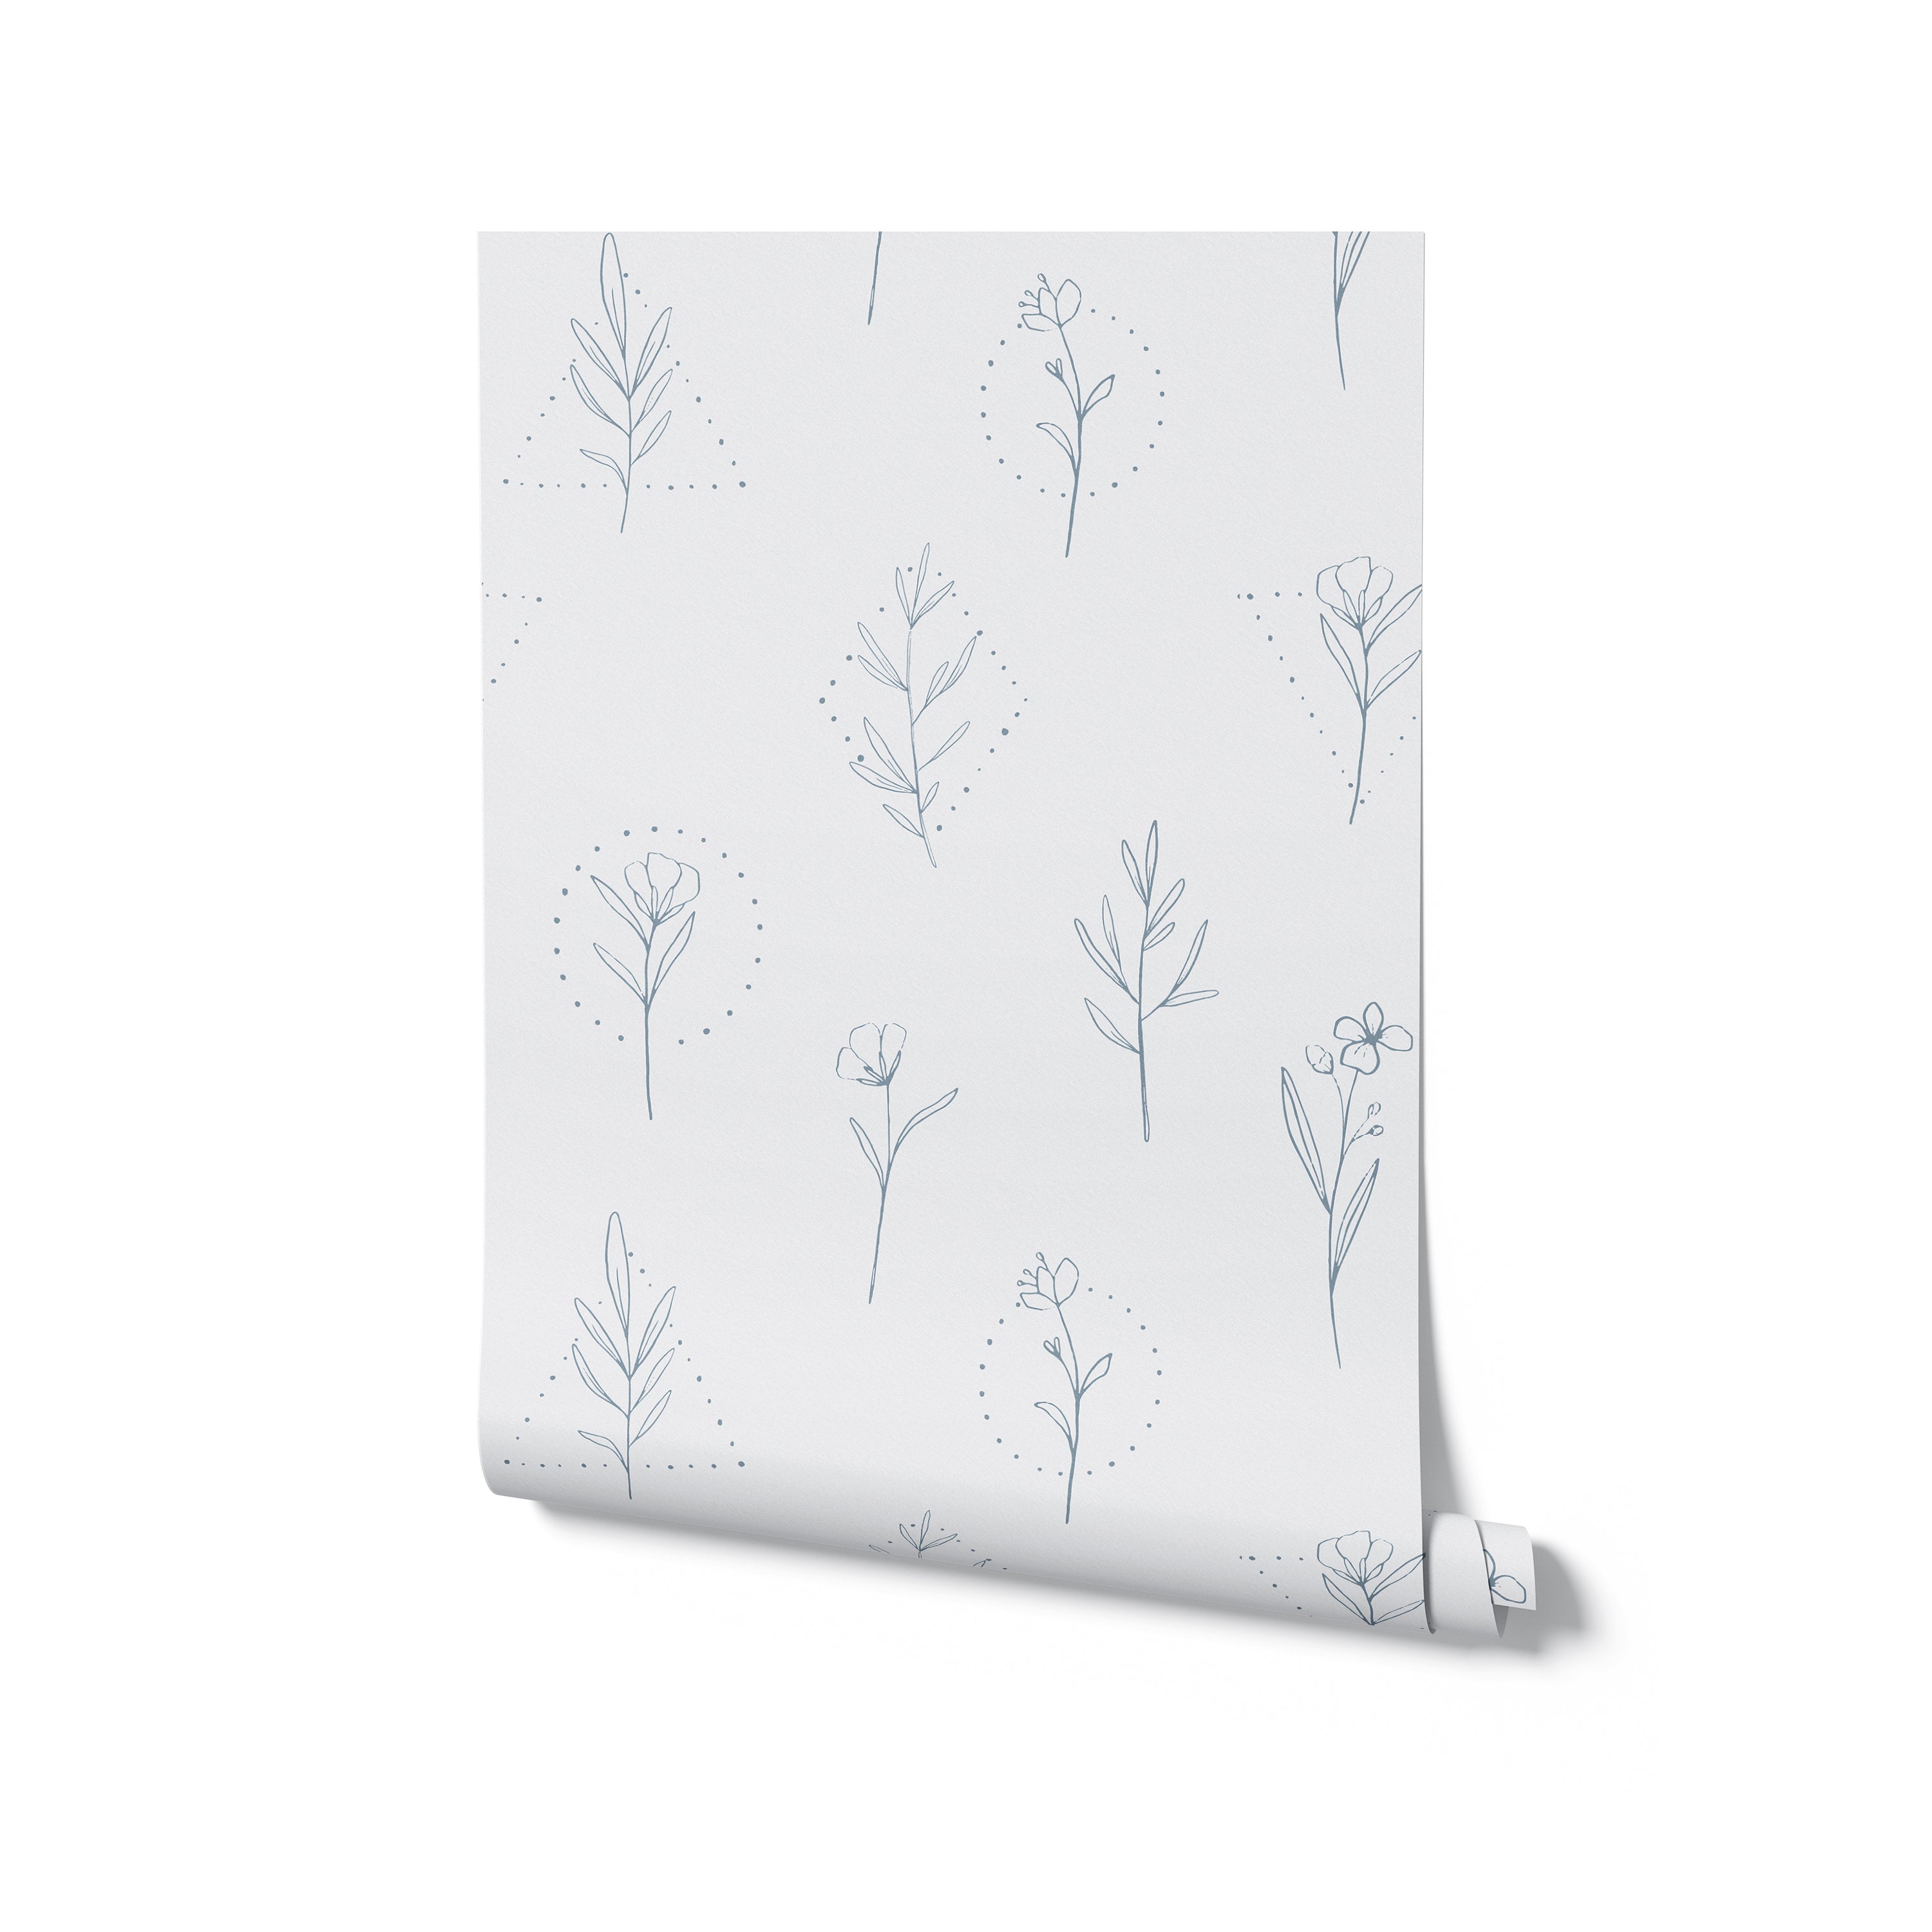 A roll of wallpaper with a white background featuring a repeated pattern of simple blue line drawings of various plants and flowers. The illustrations include stylized leaves, stems, and blossoms, some encircled by dotted lines suggesting a geometric form, creating a clean and modern aesthetic.